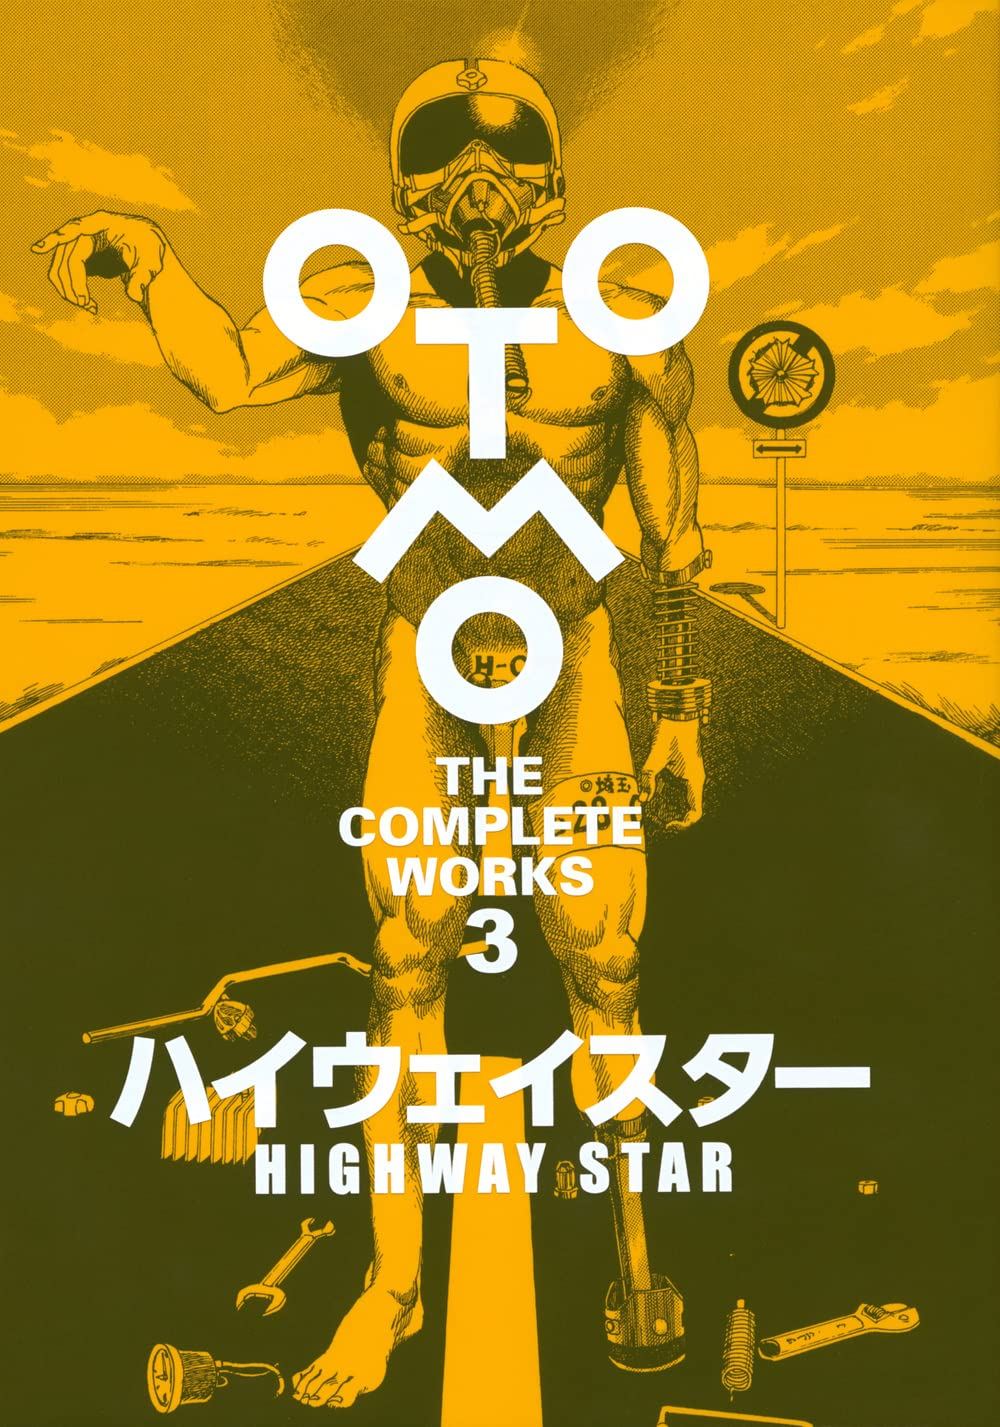 Highway Star - Otomo The Complete Works